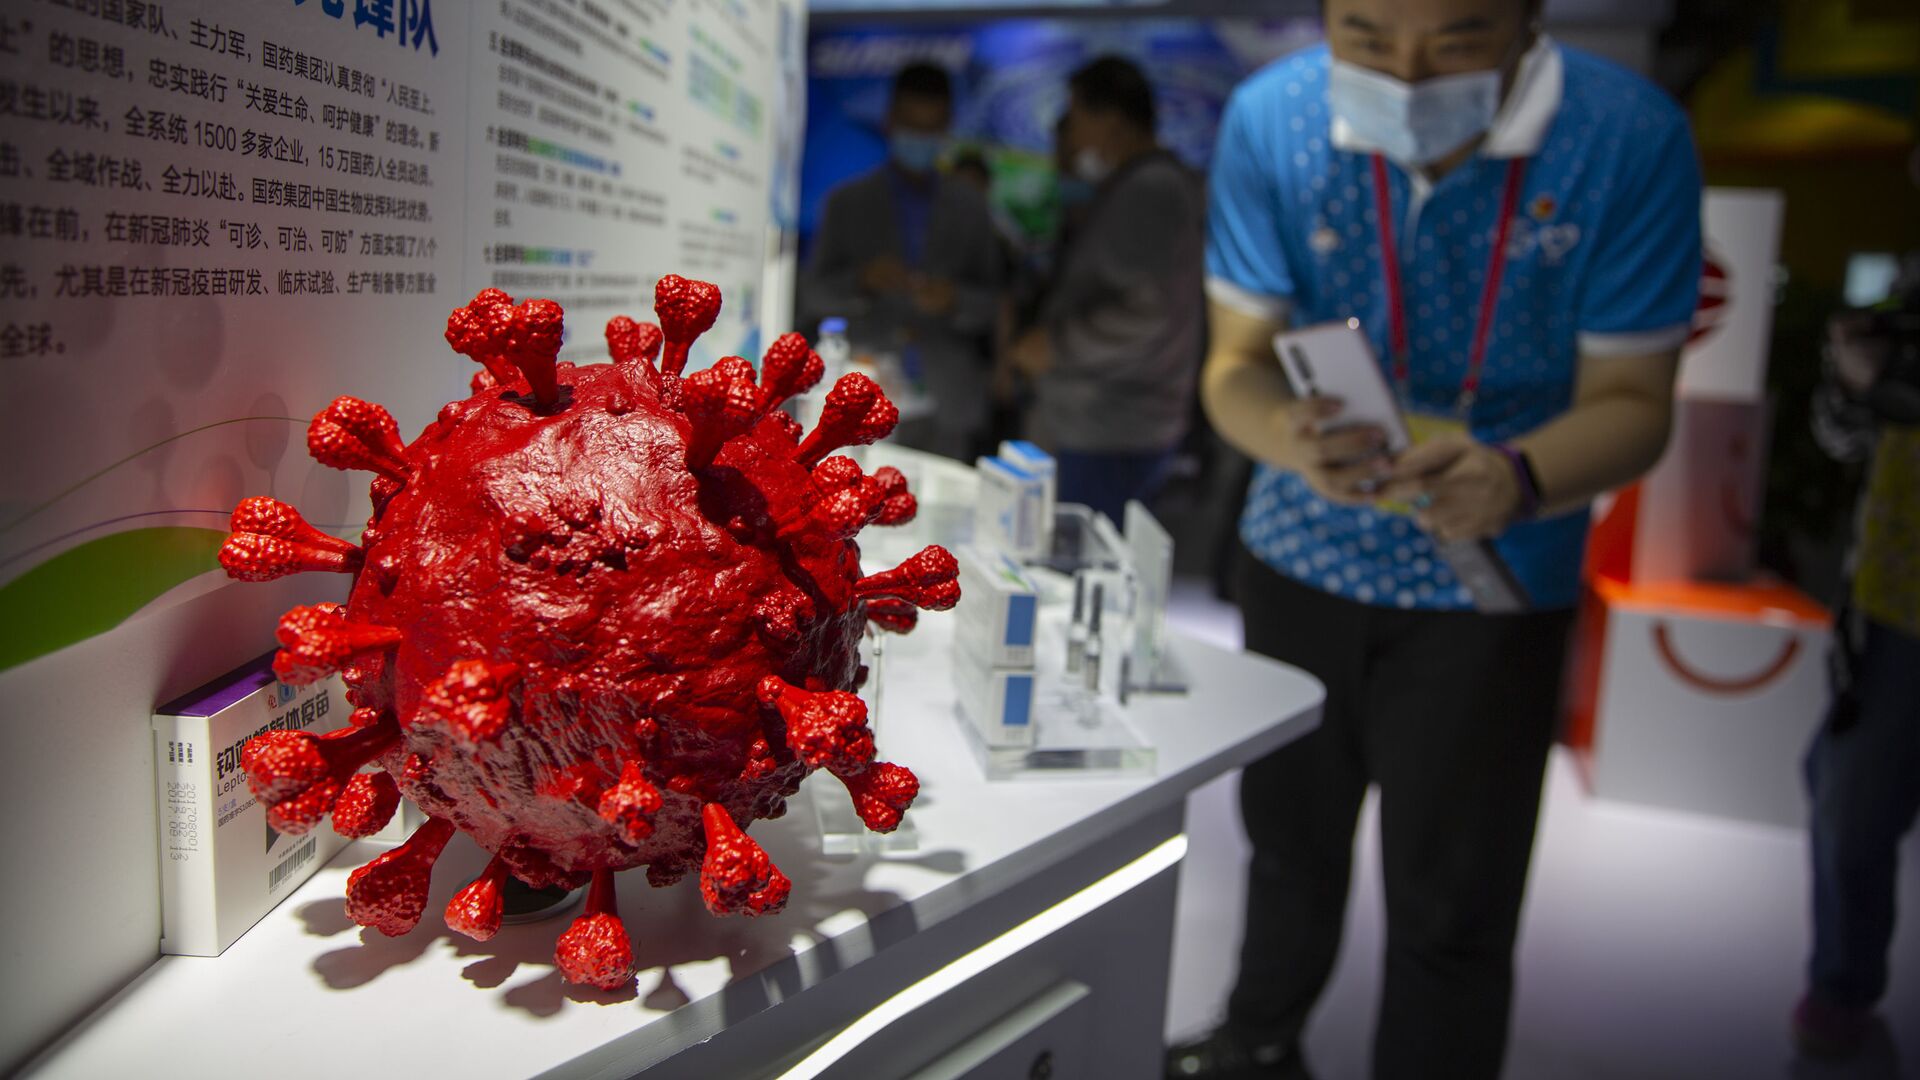 A visitor wearing a face mask takes a photo of a model of a coronavirus and boxes for COVID-19 vaccines at a display by Chinese pharmaceutical firm Sinopharm at the China International Fair for Trade in Services (CIFTIS) in Beijing, Saturday, Sept. 5, 2020. With the COVID-19 pandemic largely under control, China's capital on Saturday kicked off one of the first large-scale public events since the start of the coronavirus outbreak, as tens of thousands of attendees were expected to visit displays from nearly 2,000 Chinese and foreign companies showcasing their products and services. - Sputnik International, 1920, 22.06.2021